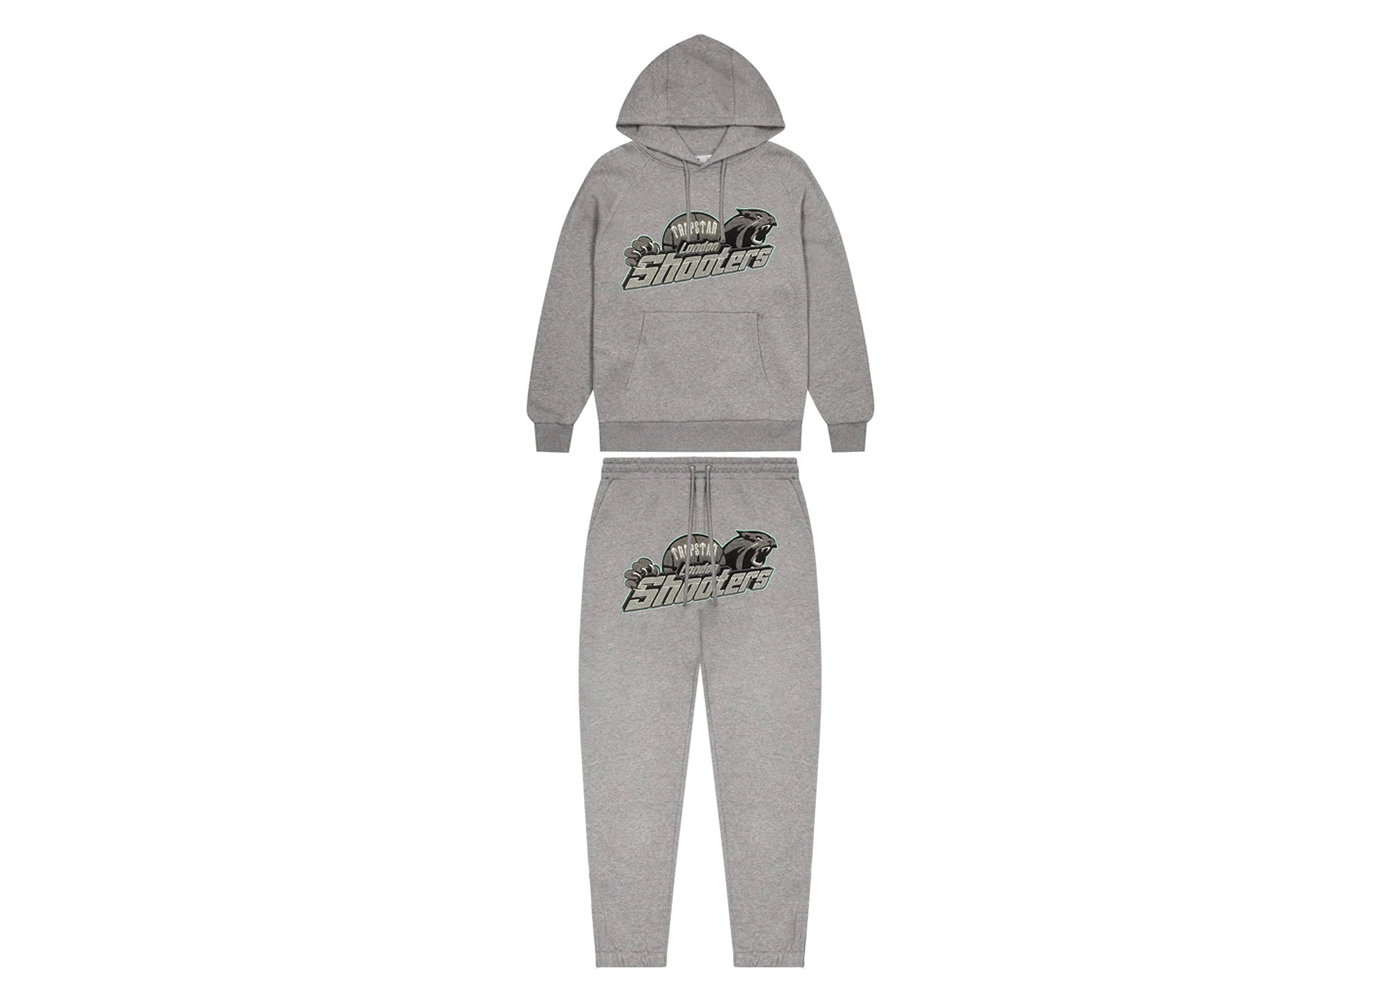 Trapstar Shooters Hoodie Tracksuit Grey/Teal